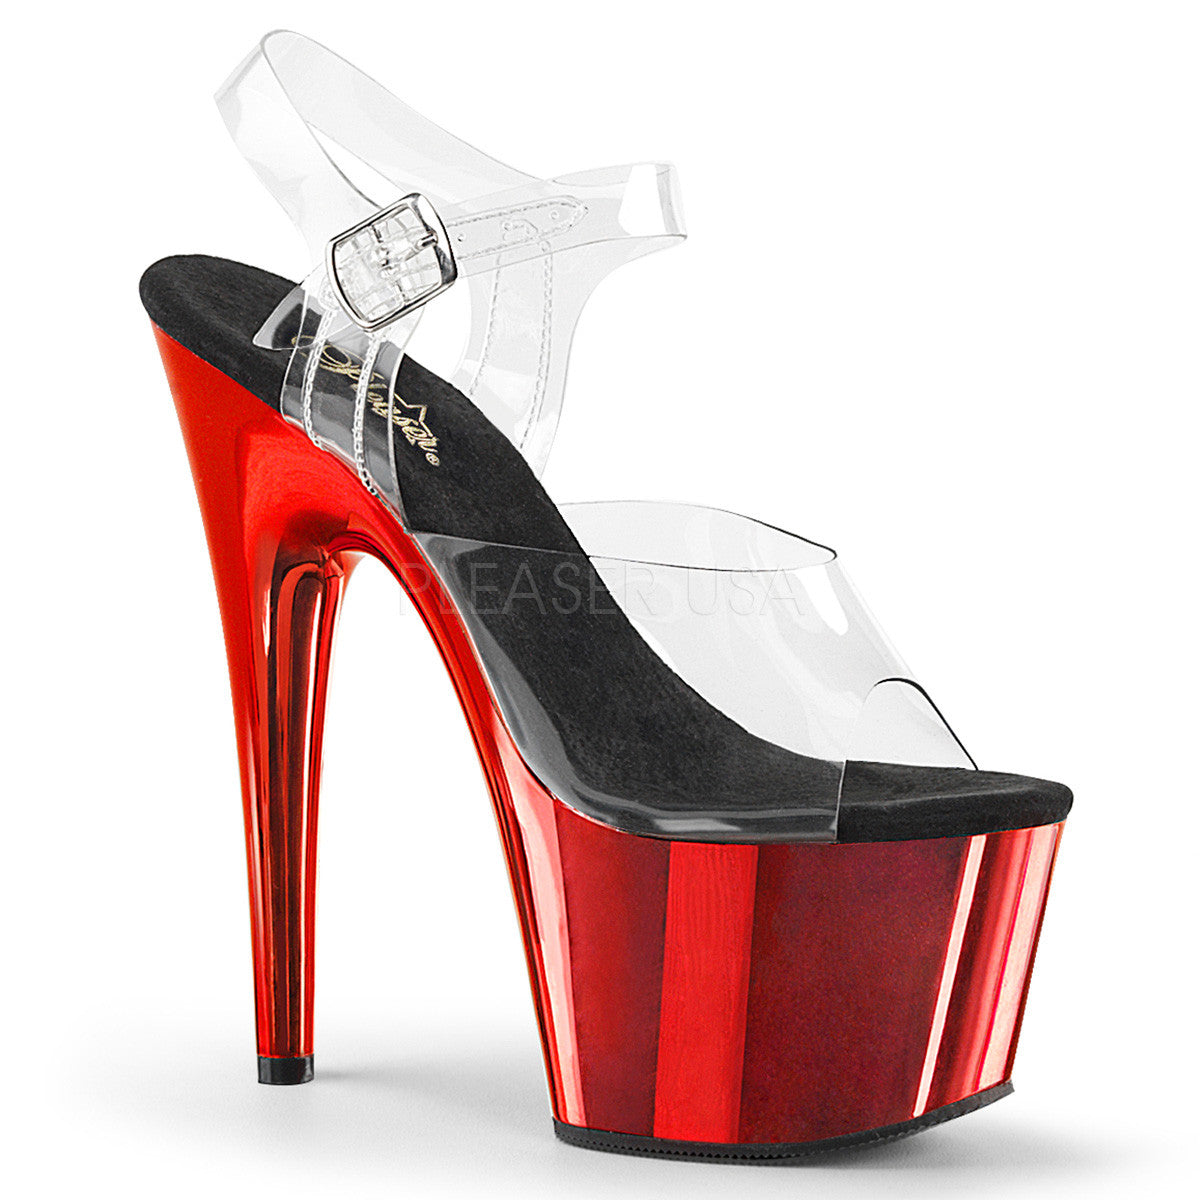 Pleaser ADORE-708 Red Chrome Exotic Dancing Sandals - Shoecup.com - 1